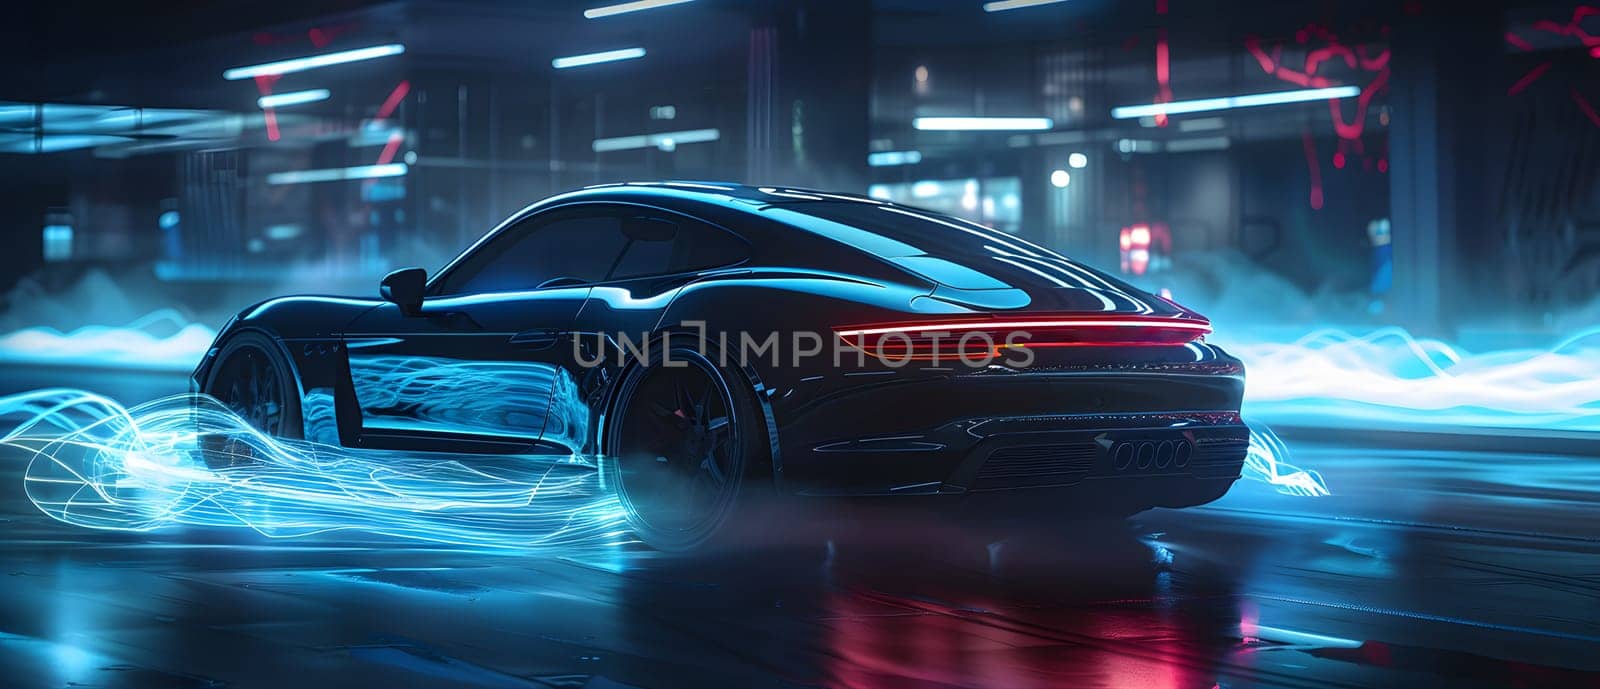 An electric blue personal luxury car with automotive lighting is cruising down a dark, wet street at night, showcasing its sleek automotive design and shiny bumper